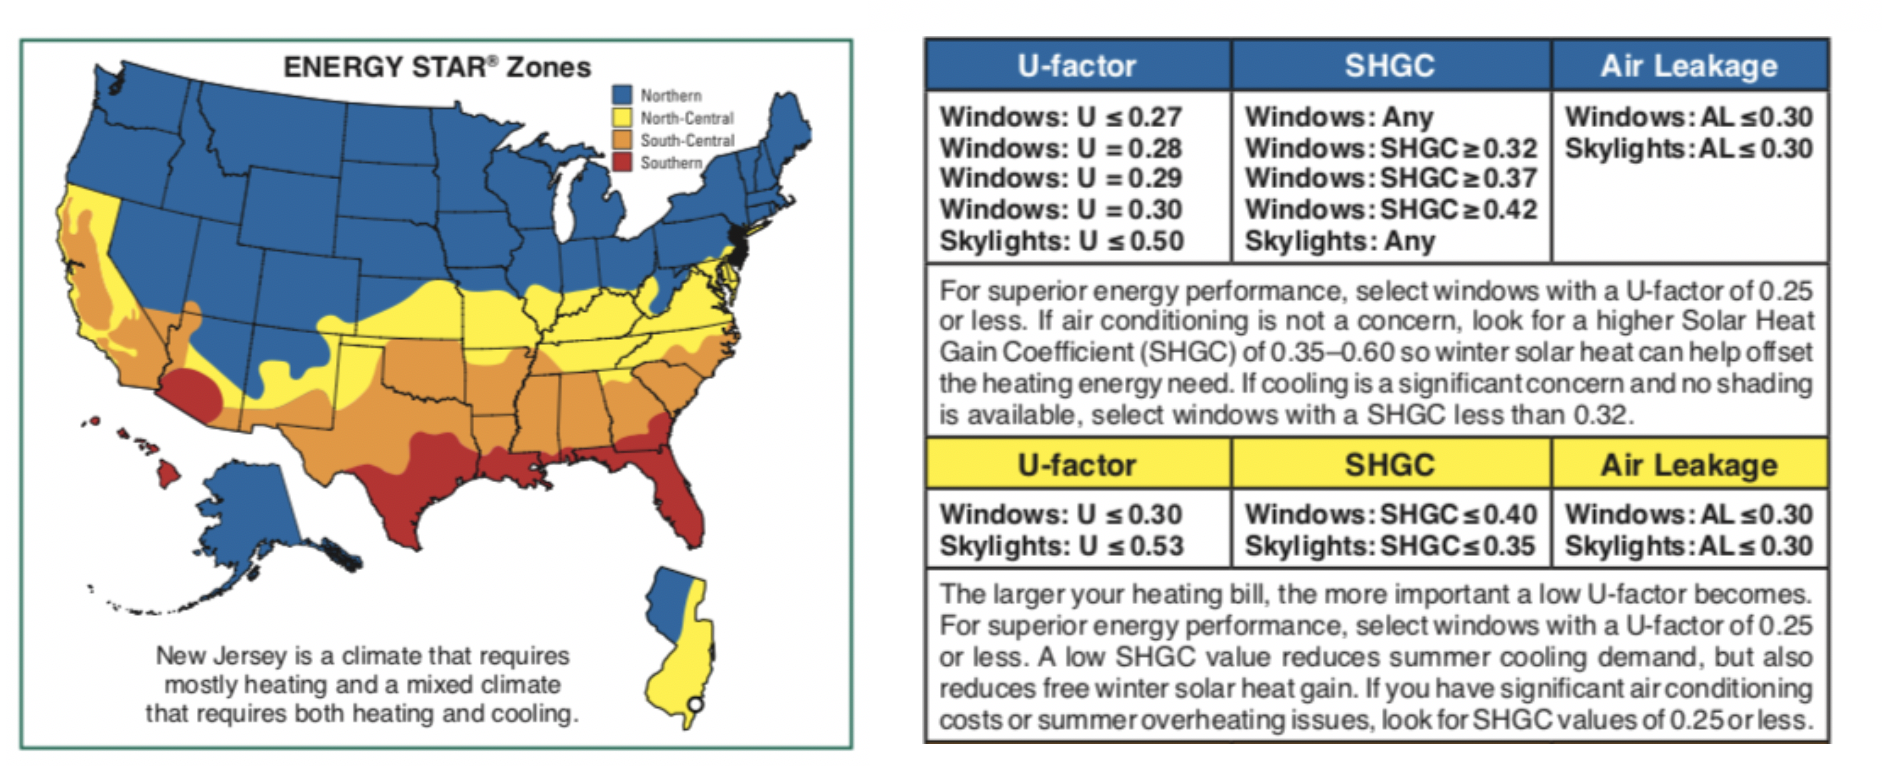 Figure 2 – ENERGY STAR Recommended U-factor, SHGC and Air Leakage values for New Jersey’s Mixed Climate (Source: The Efficient Windows Collaborative).